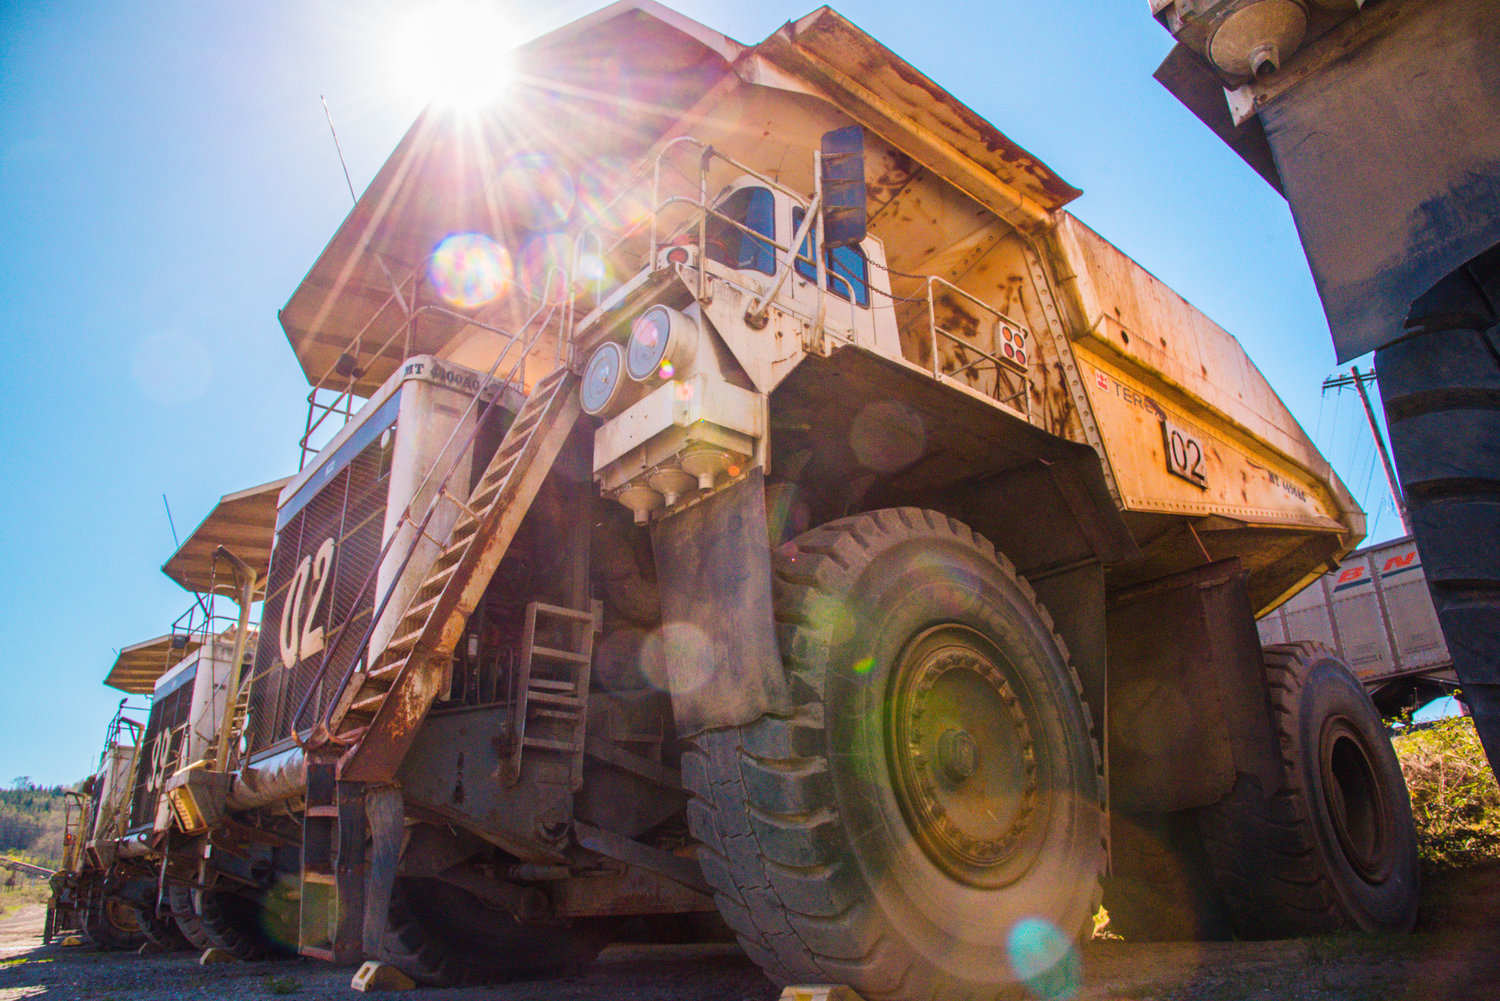 The sun shines down on trucks used for mining operations at TransAlta in Centralia on Thursday.